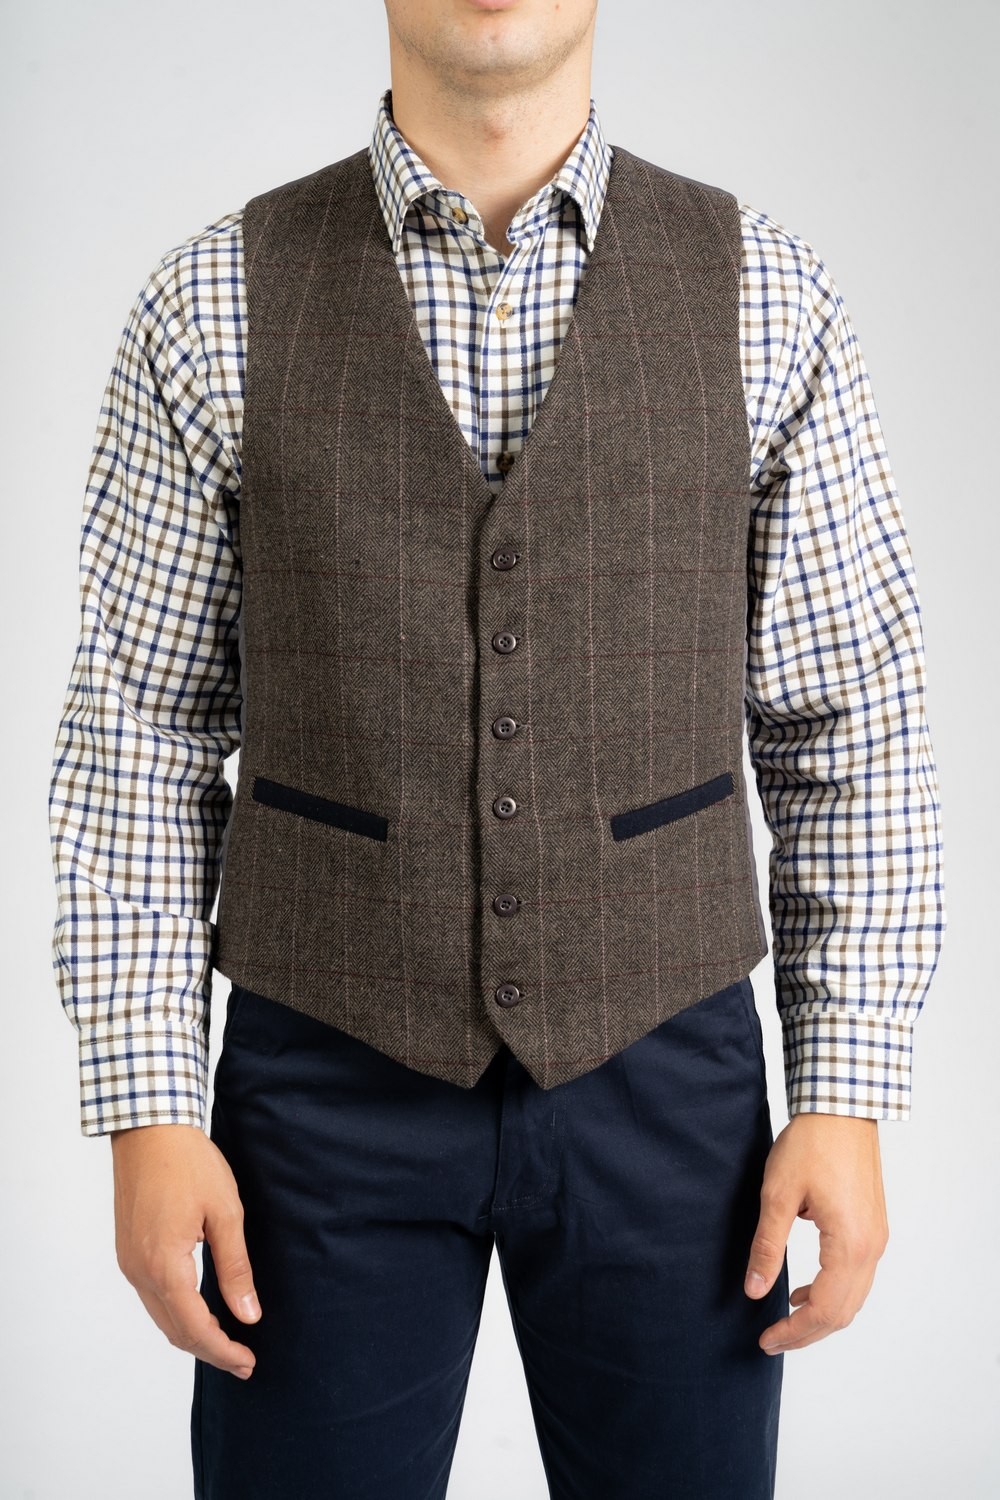 Carabou waistcoat Selby Charcoal size M